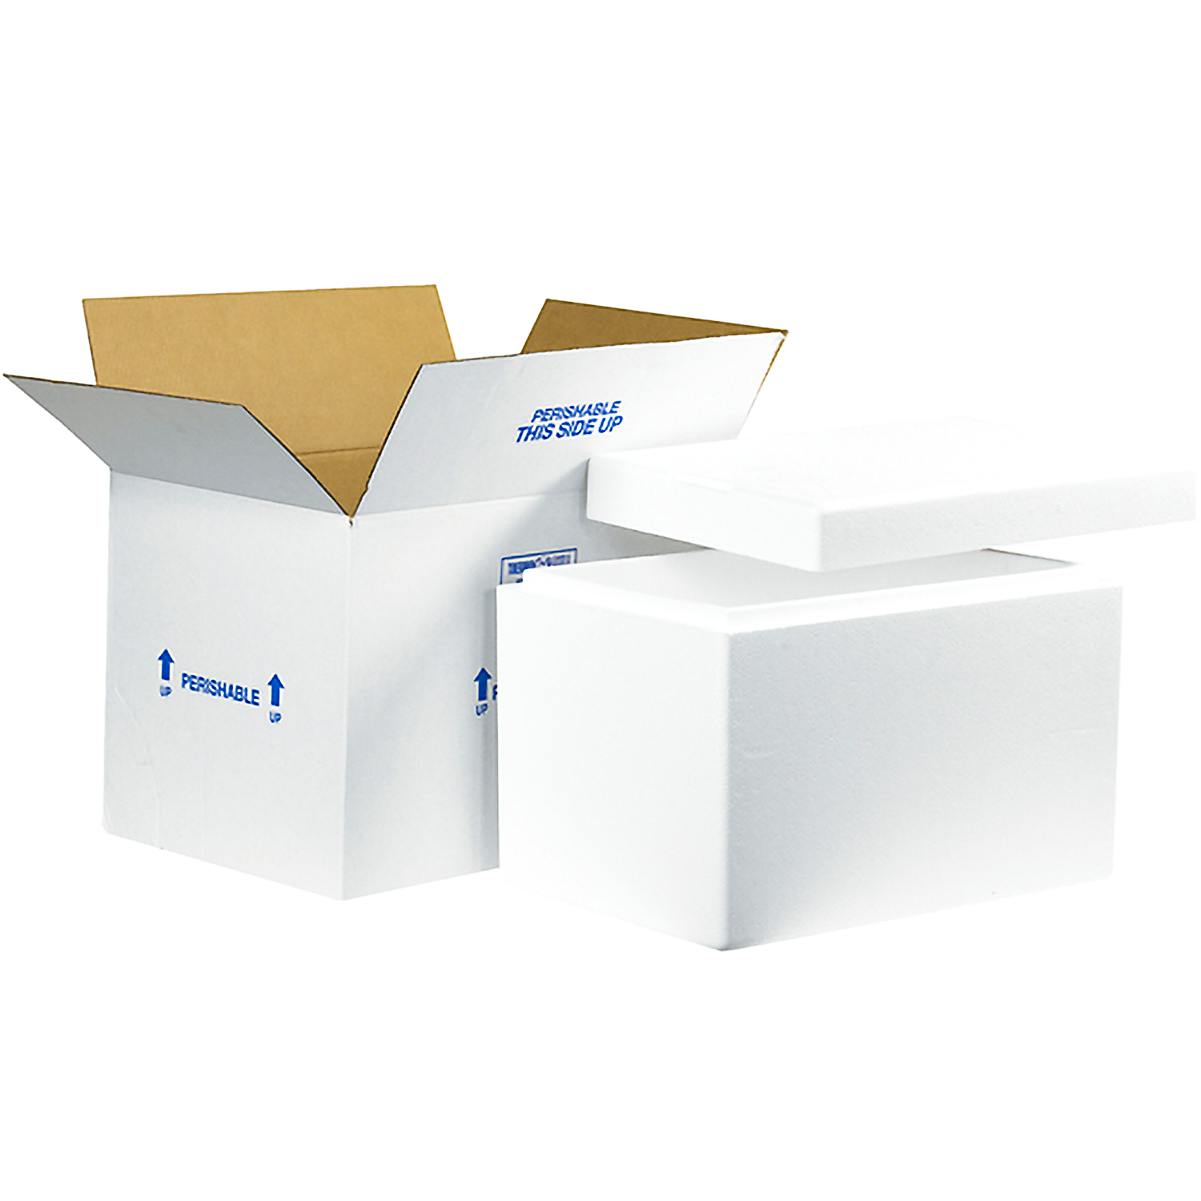 Insulated Foam Containers  Styrofoam Foam Coolers & Insulated Boxes -  Trinity Packaging Supply